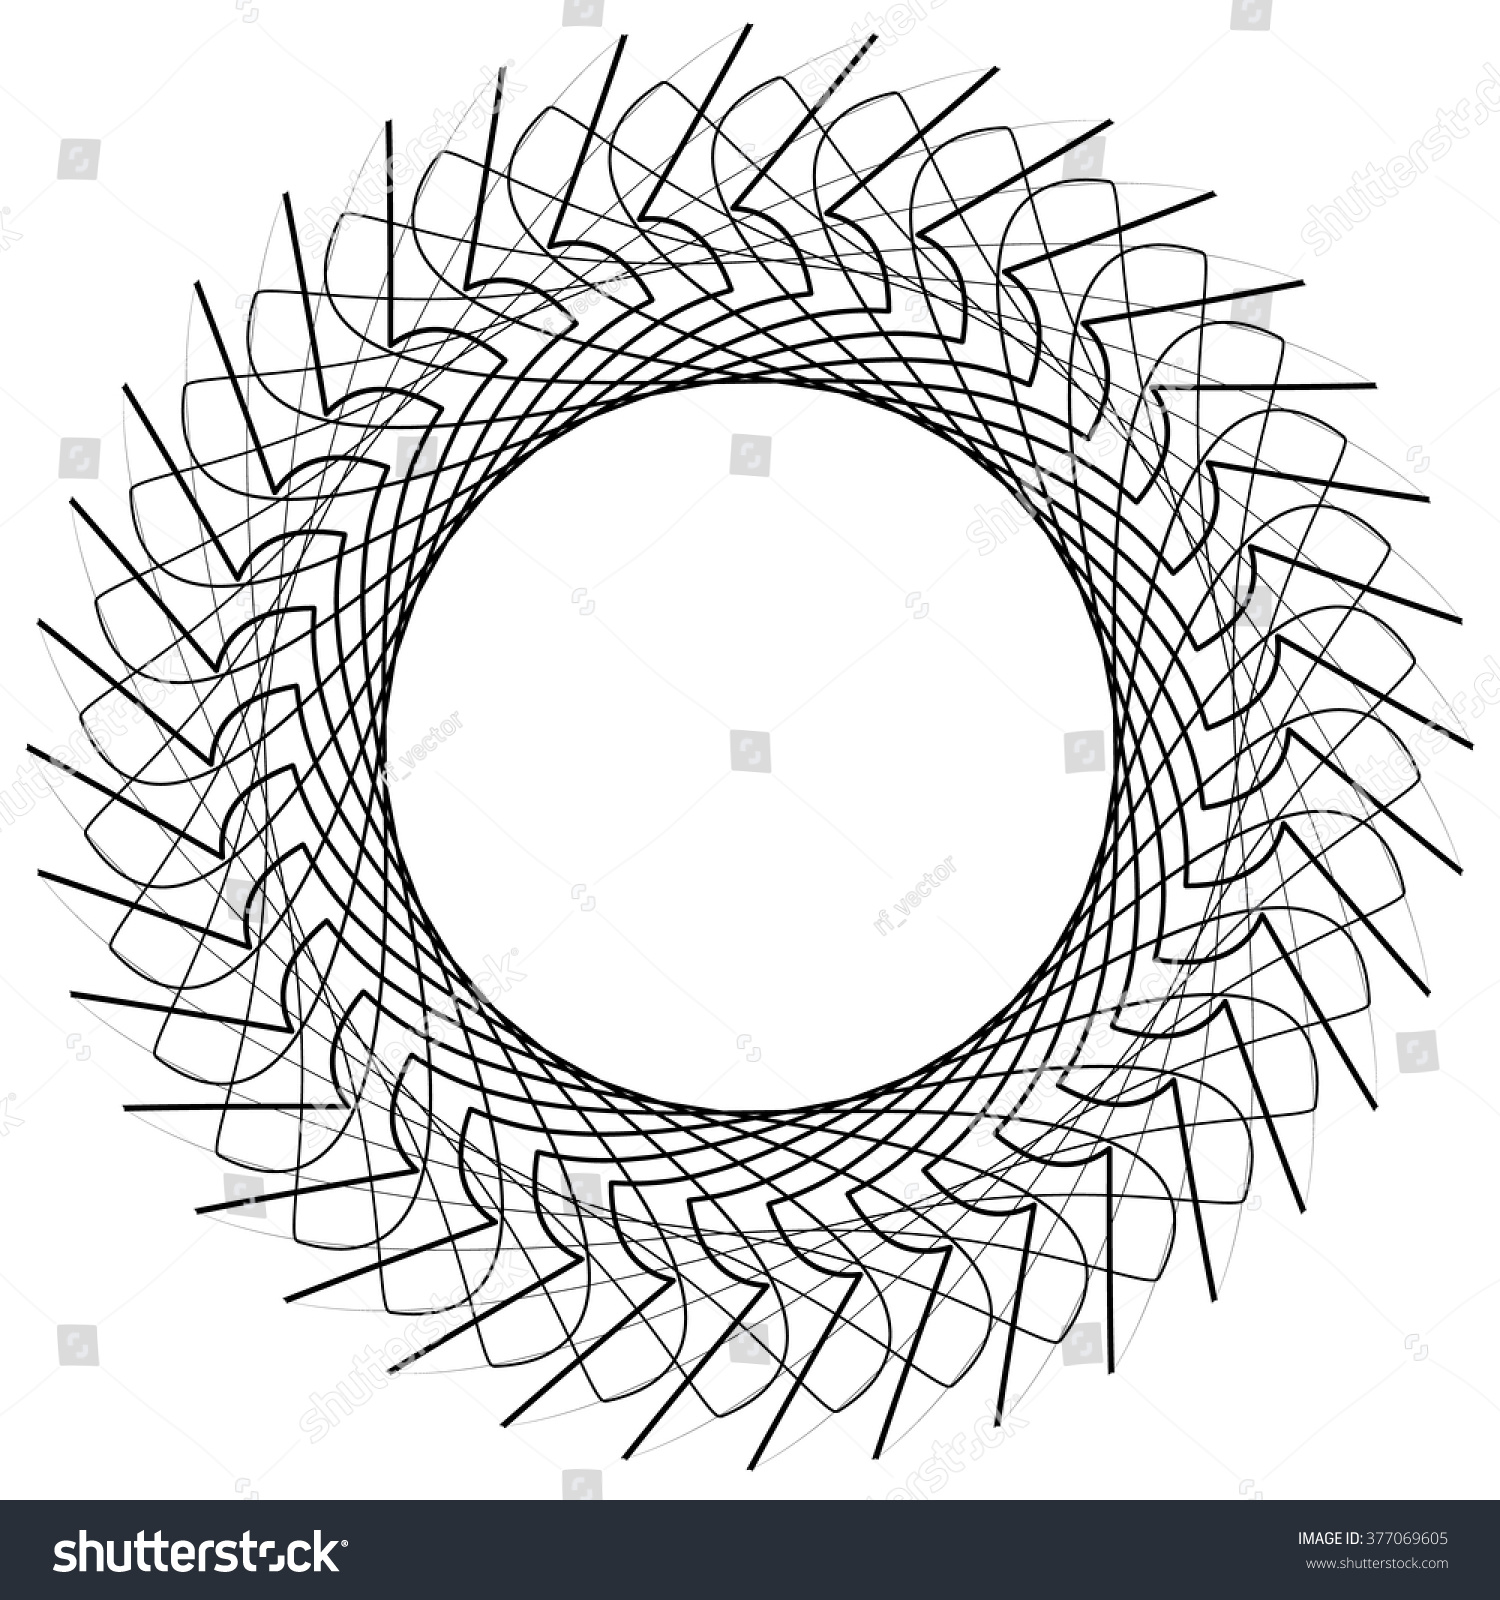 Abstract Spiral Element Motif Isolated On Stock Vector 377069605 ...